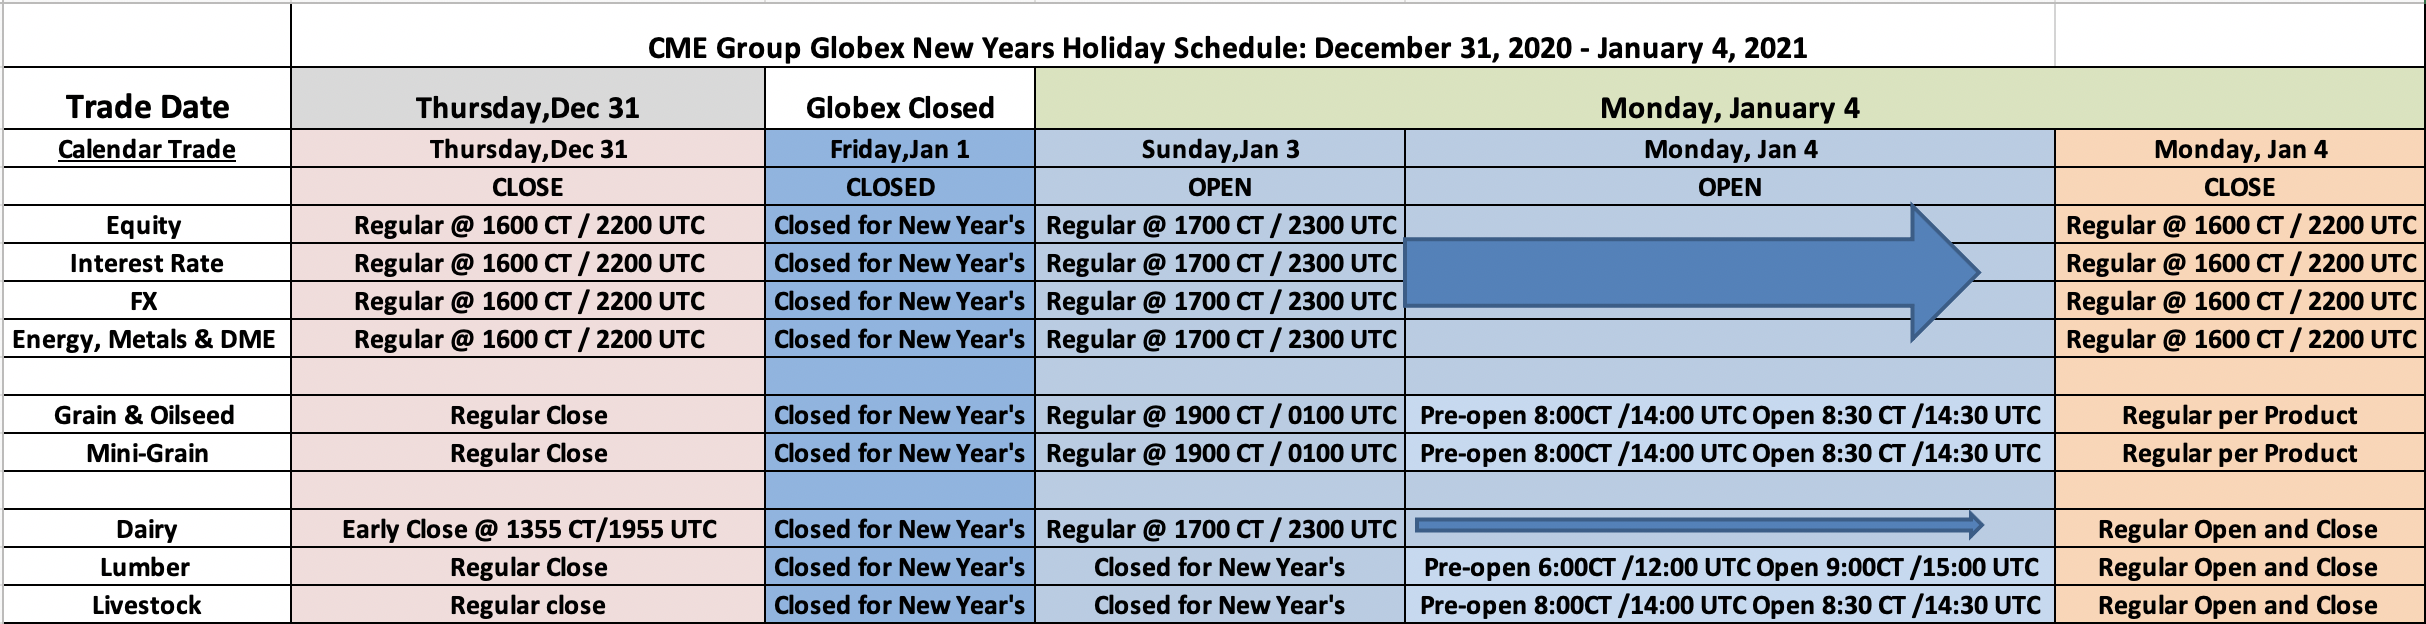 CME Group Globex New Years Holiday Schedule - December 31, 2020 - January 4, 2021